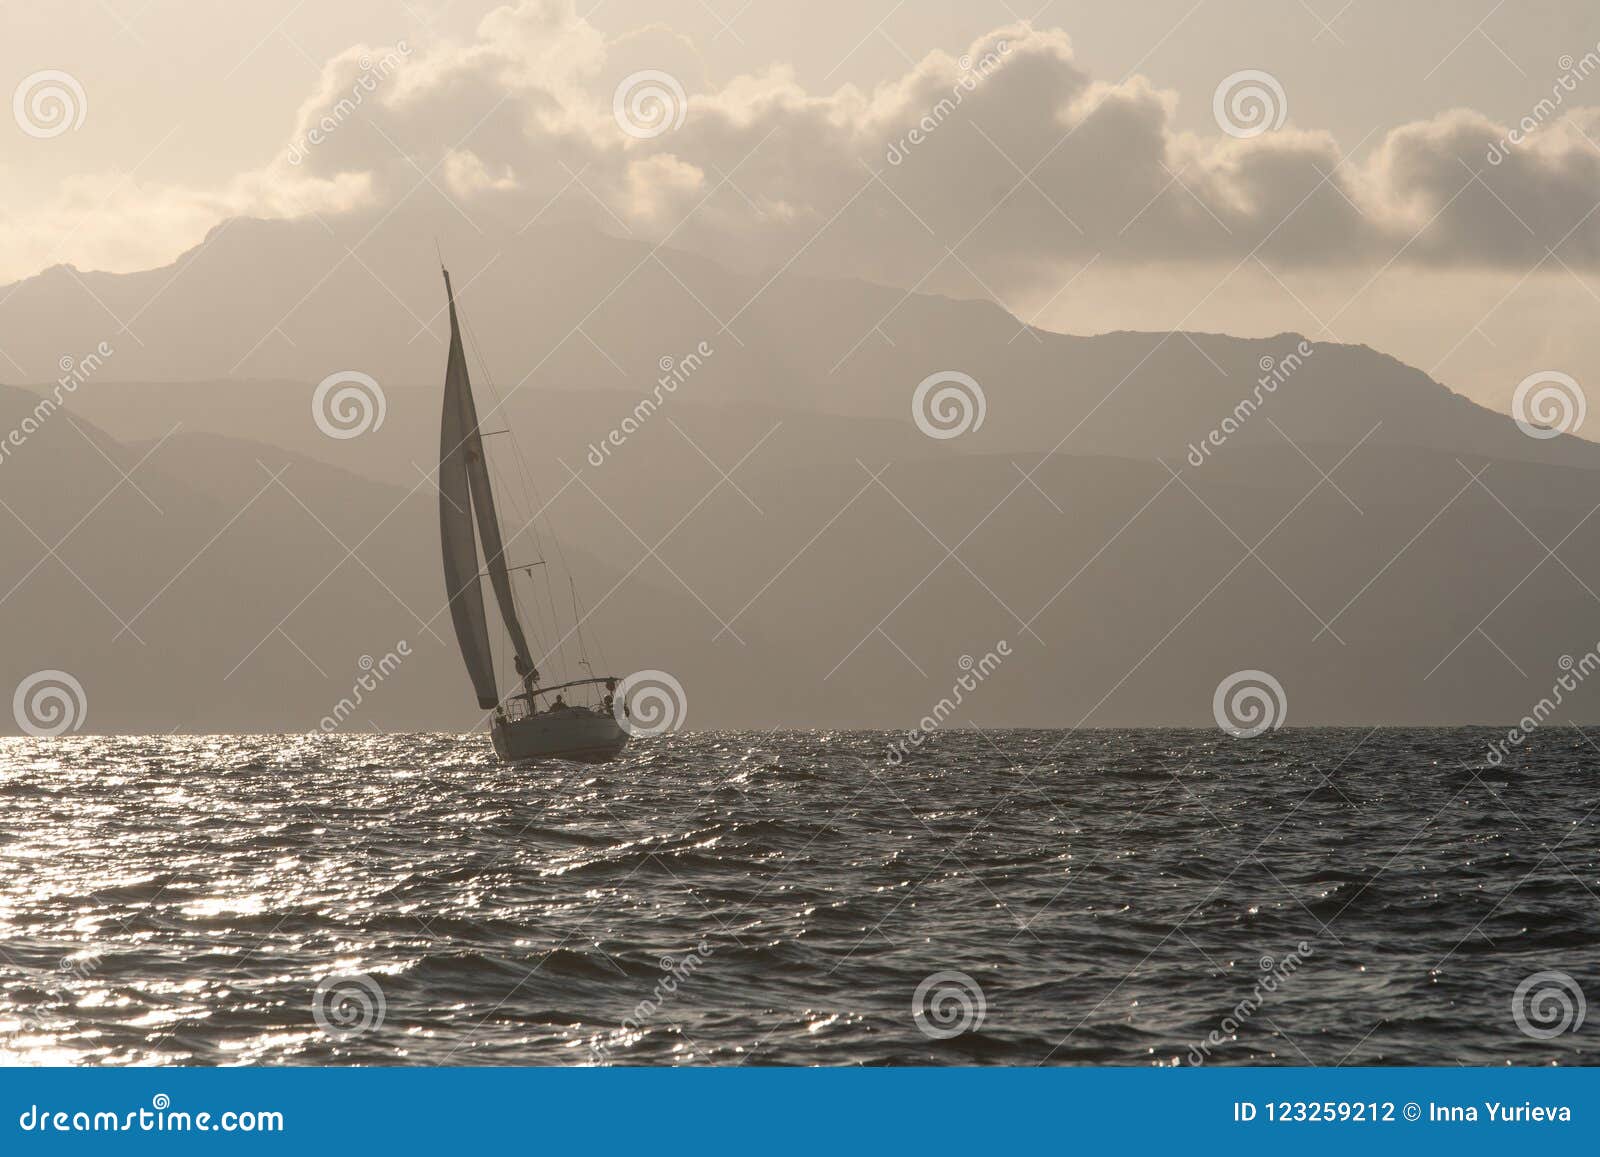 sailboat on a stormy sea against the rocky shore